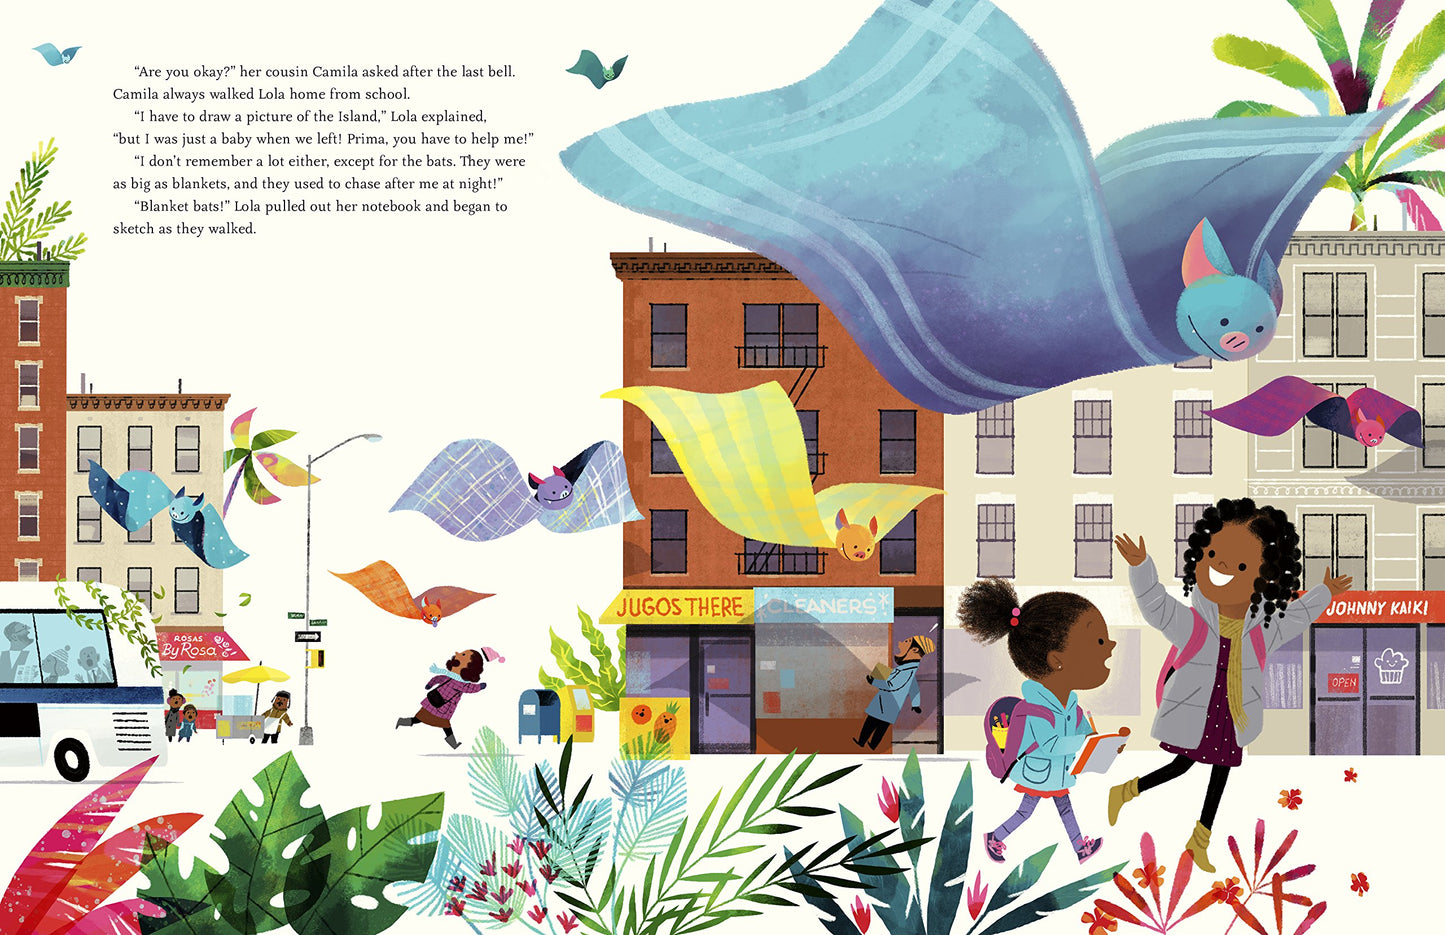 a page with illustration of a young girl walking in the city with her cousin with flying blanket bats and text